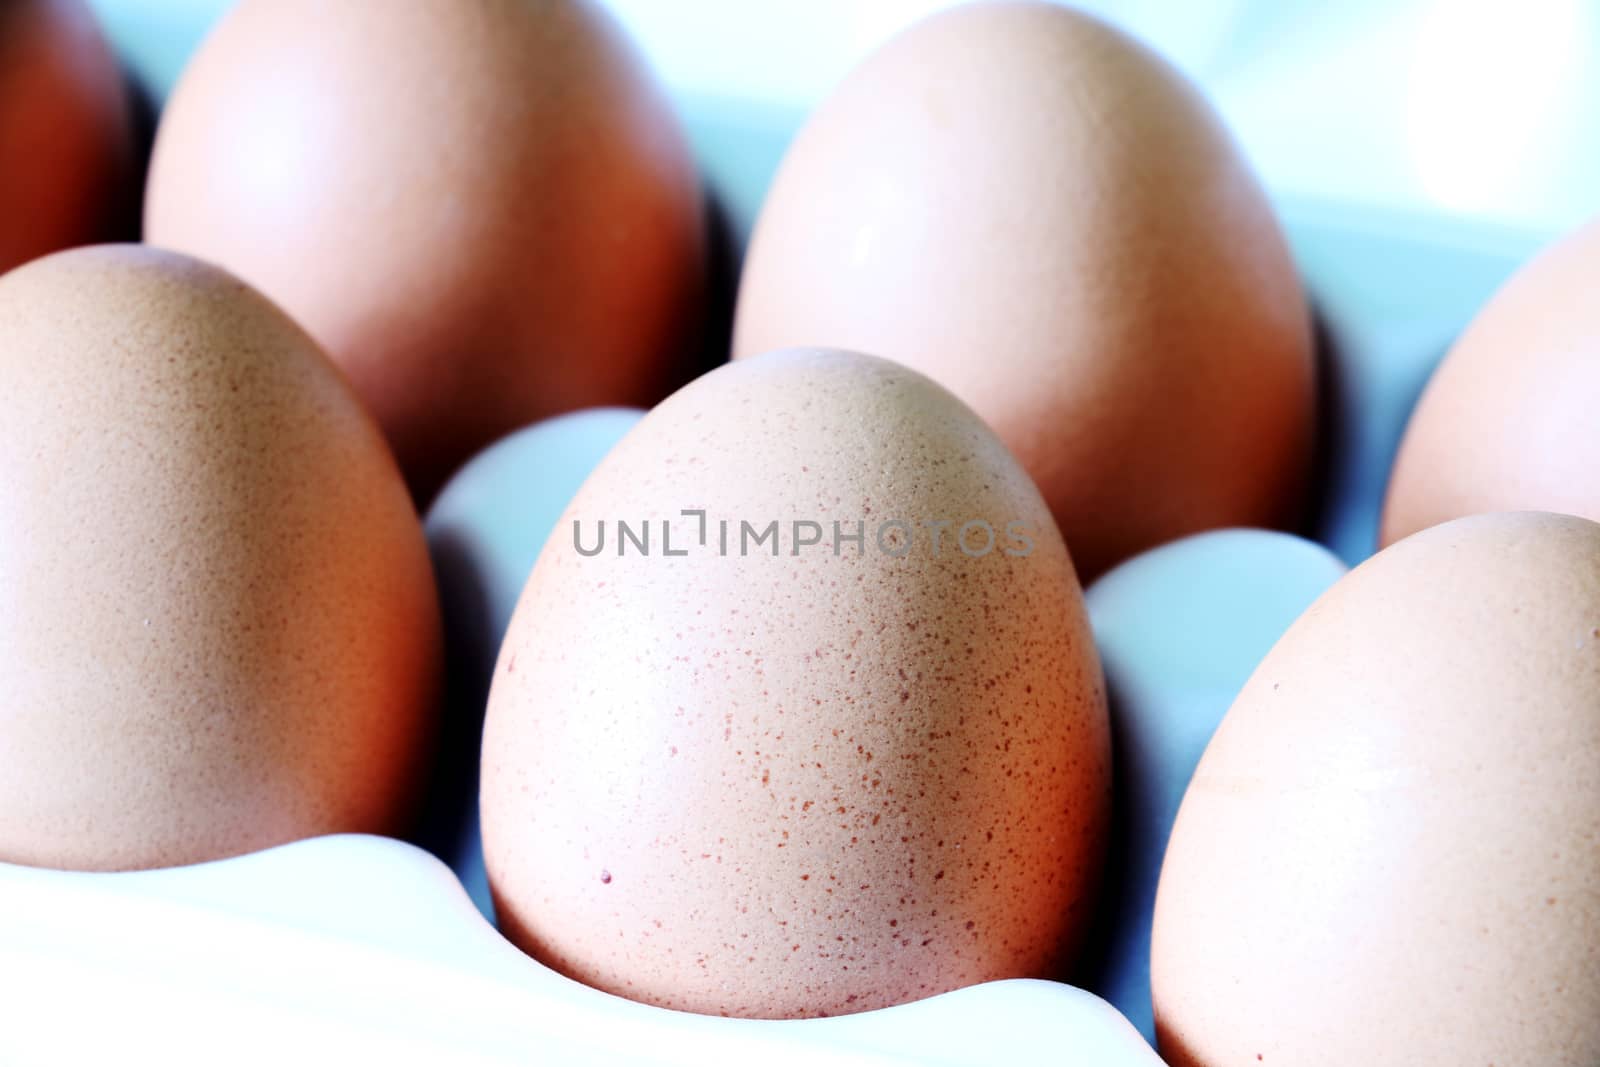 Yellow chicken eggs in a carton with empty space, background